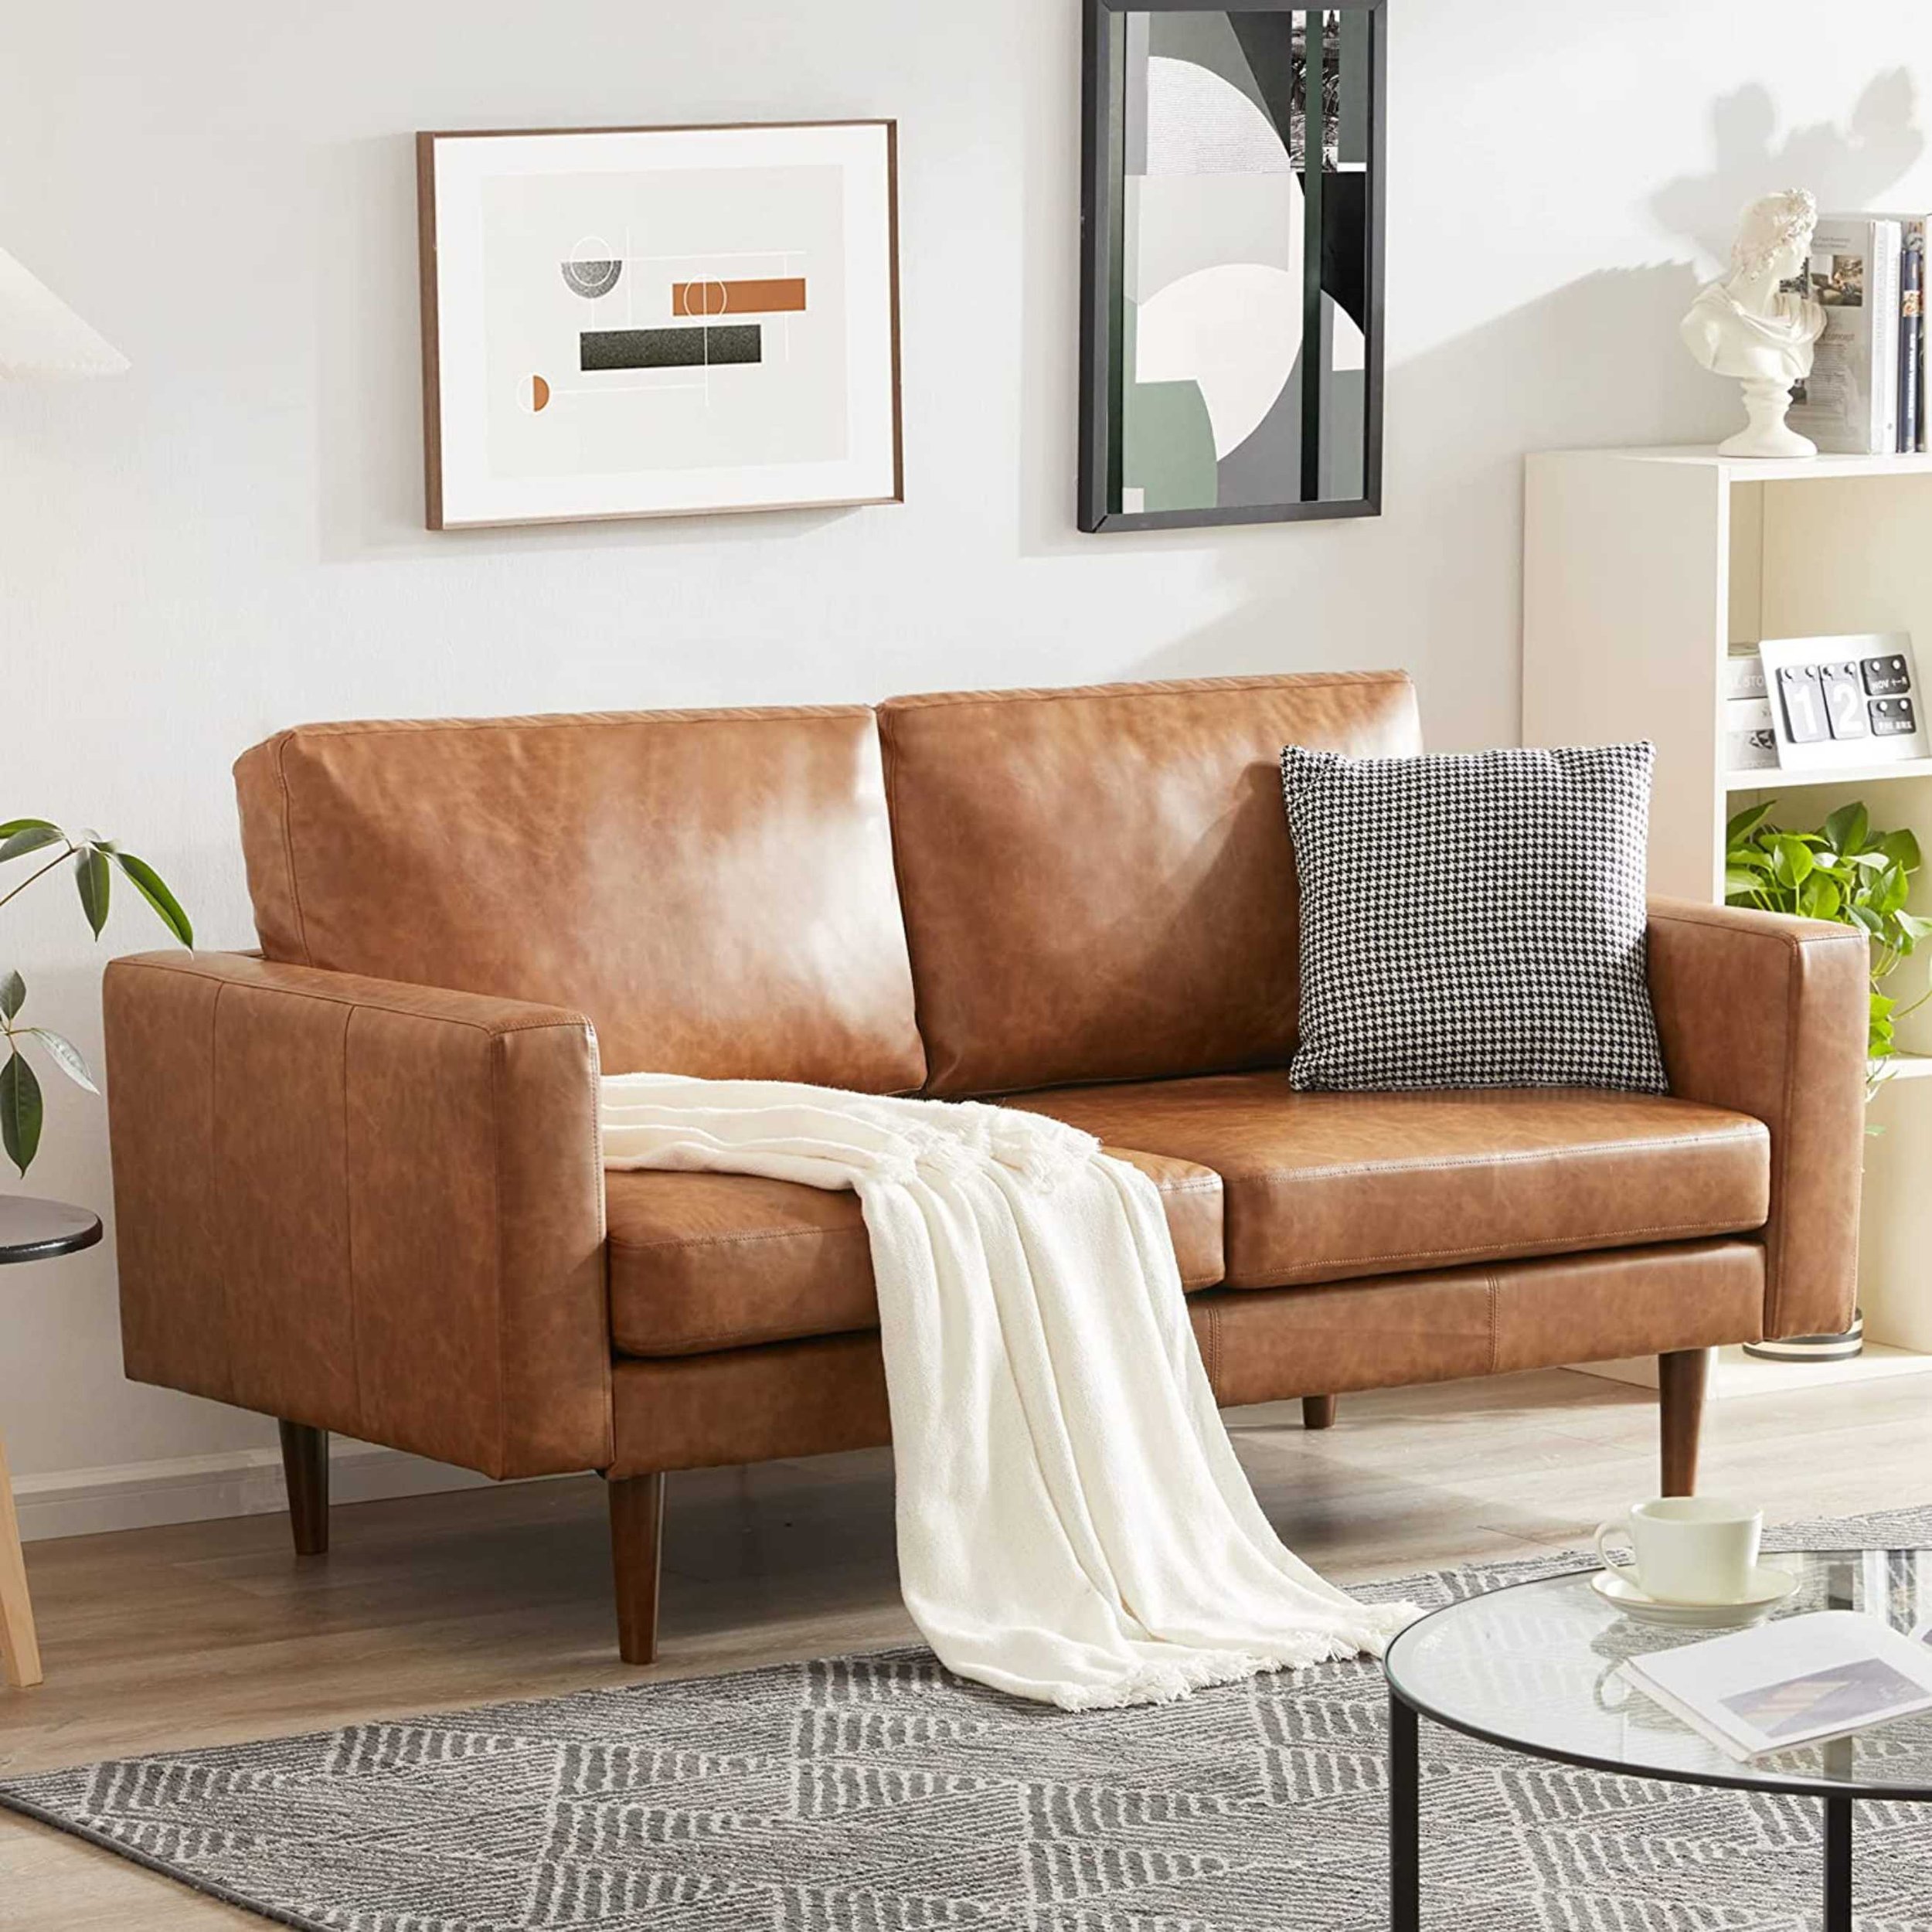 Compact Space Faux Brown Leather Loveseat.jpg